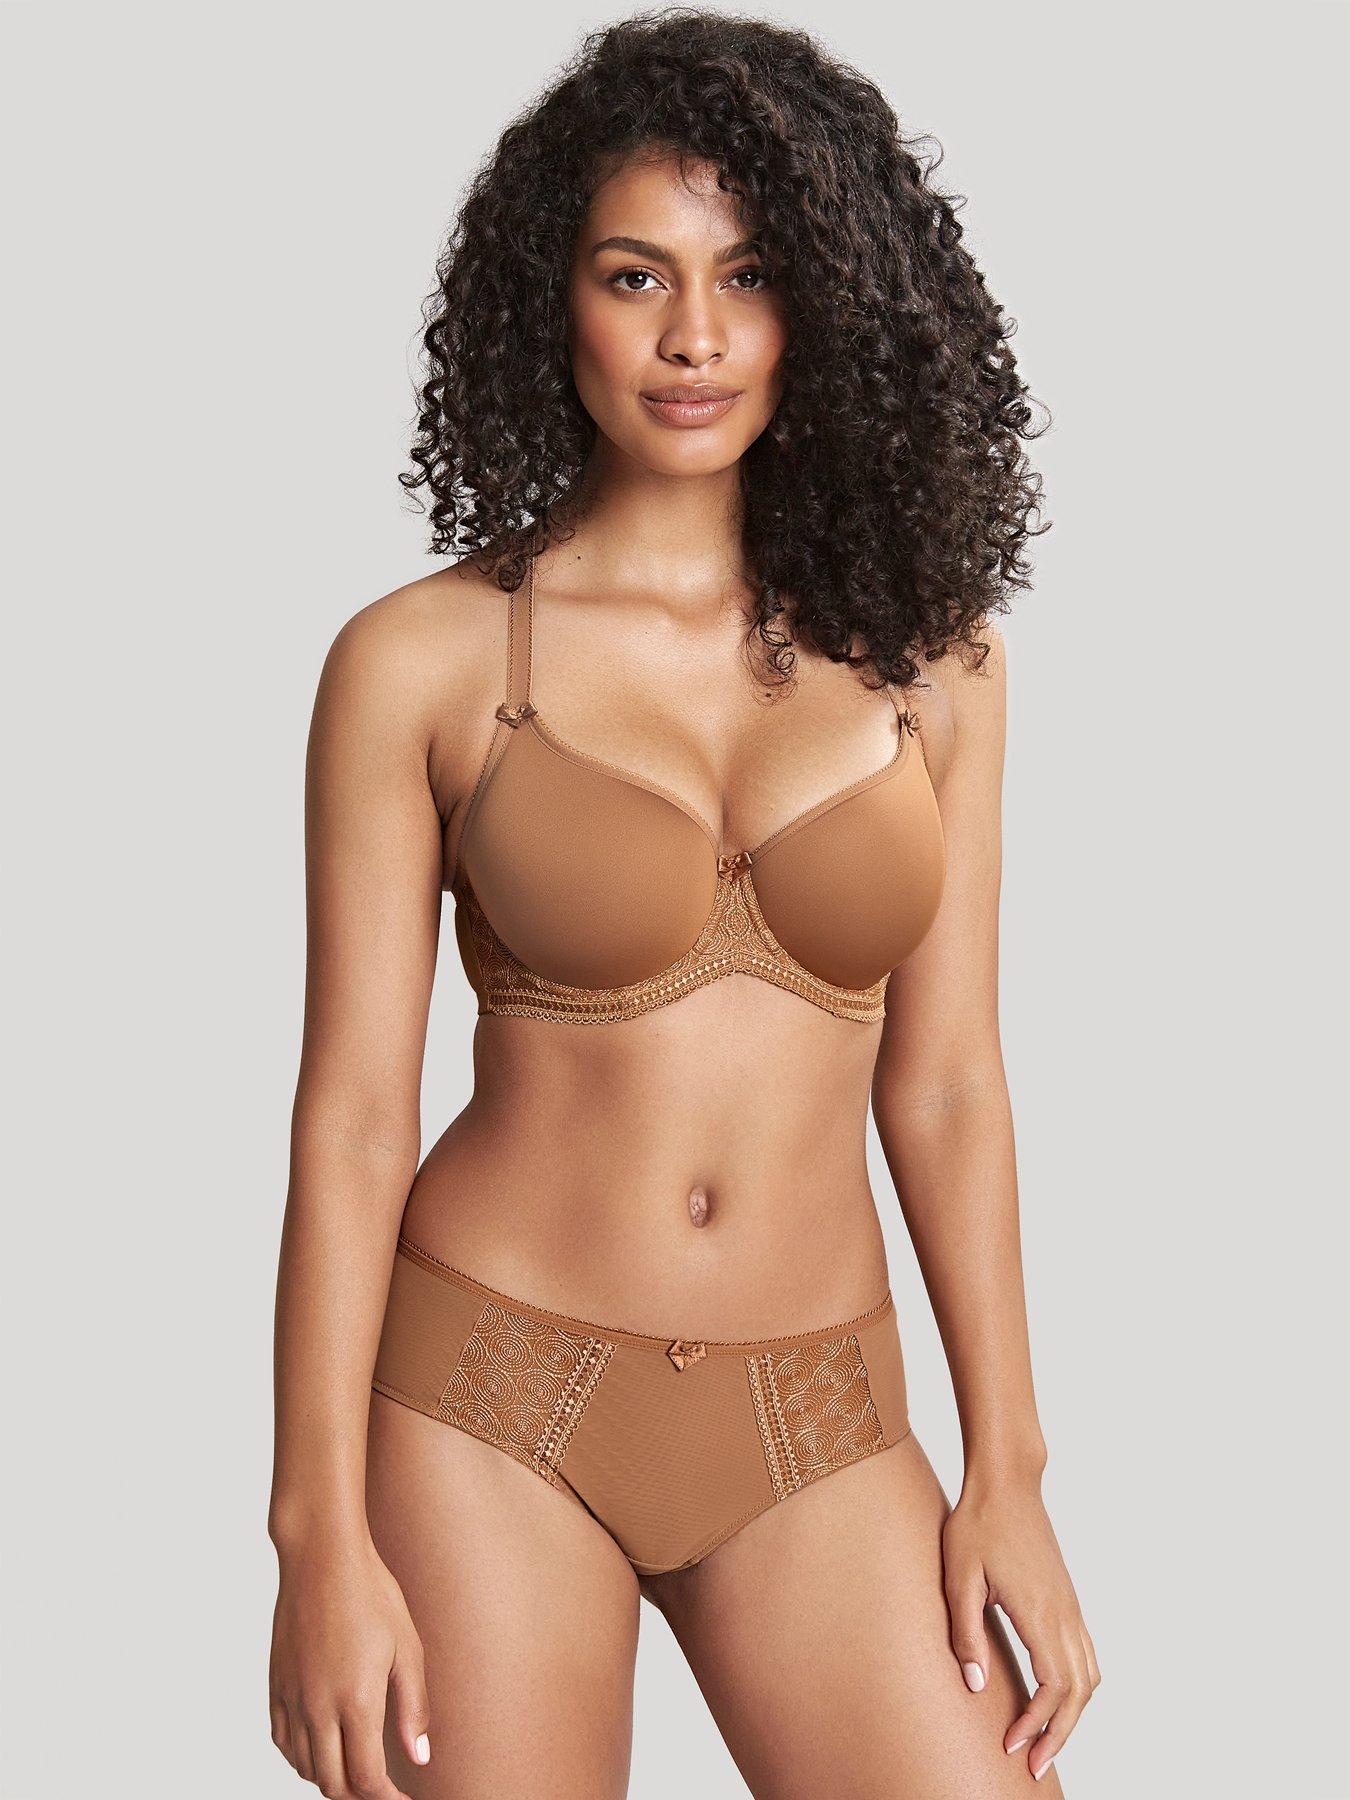 Prima Donna PrimaDonnaEvery Woman Spacer Bra - Size G 32 – Sheer